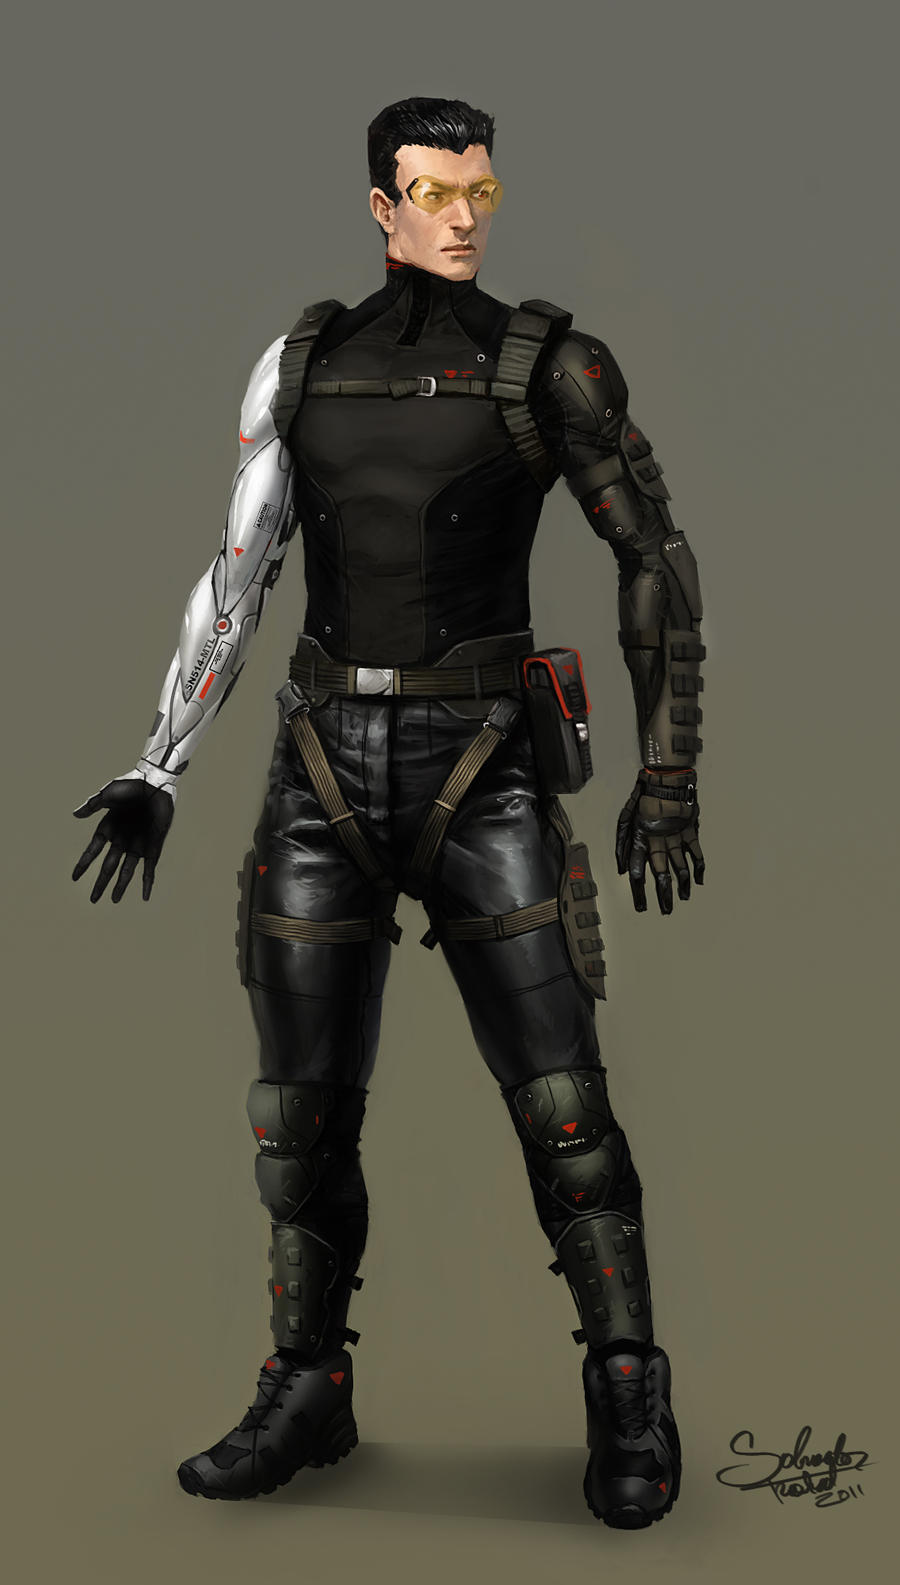 cyberpunk_character_concept_by_saturnoarg-d3h7hkr.jpg